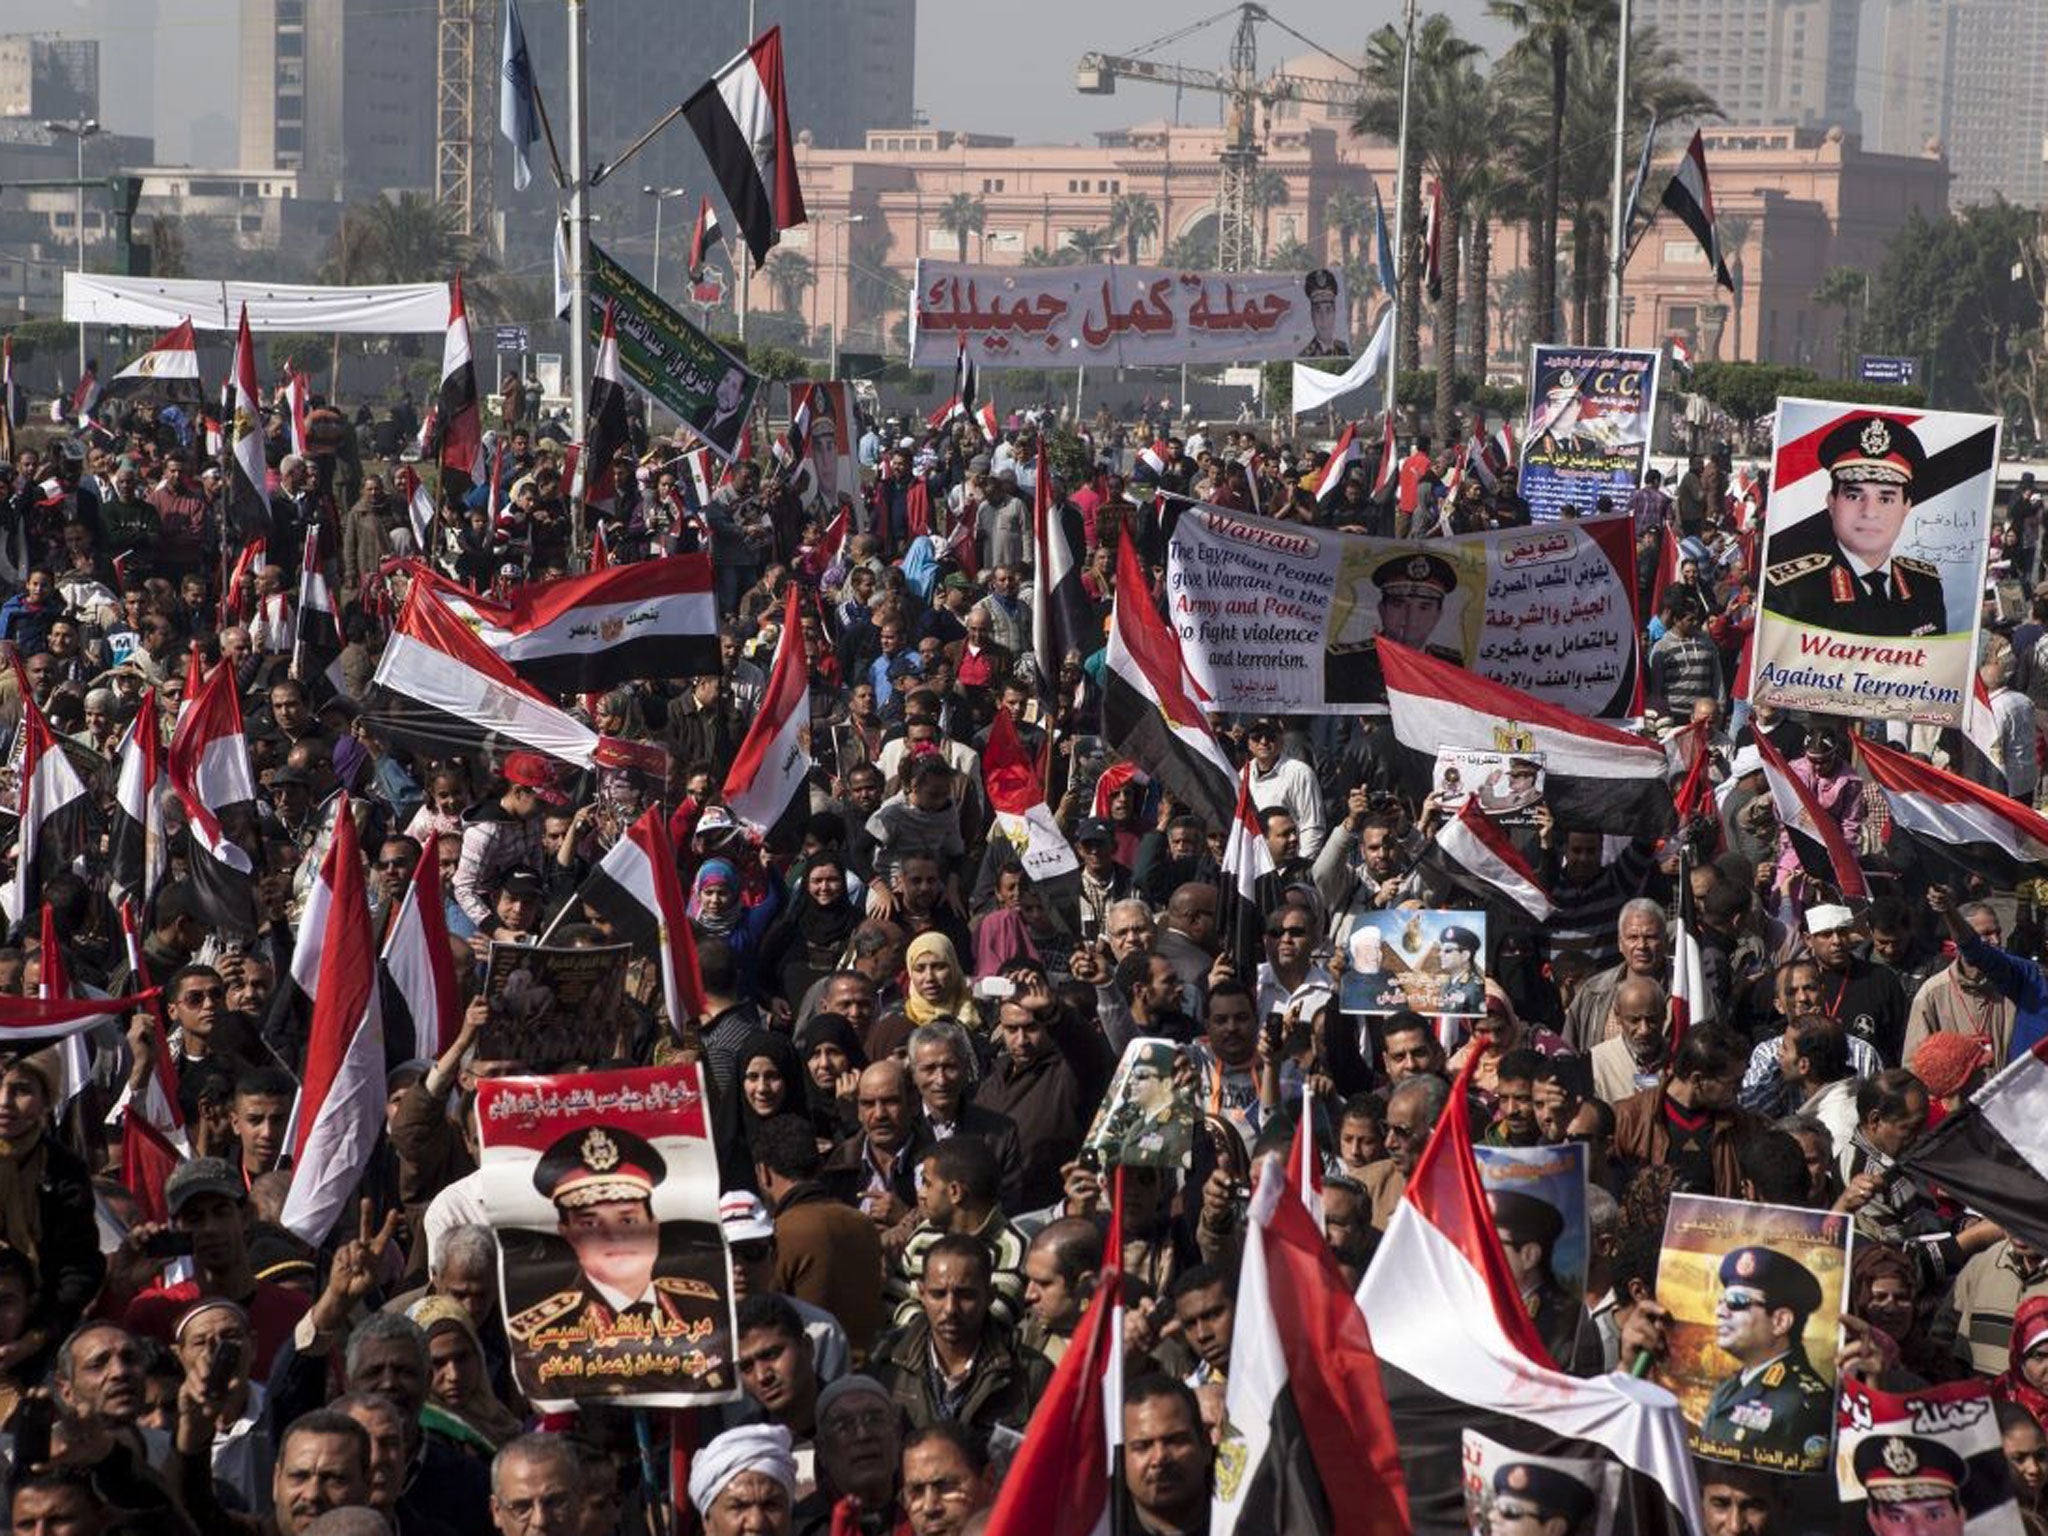 Supporters of Egyptian Defense Minister General Abdel Fattah al-Sisi gather in Tahrir Square to celebrate the third anniversary of Egypt's 2011 uprising on 25 January 2014 in Cairo, Egypt.